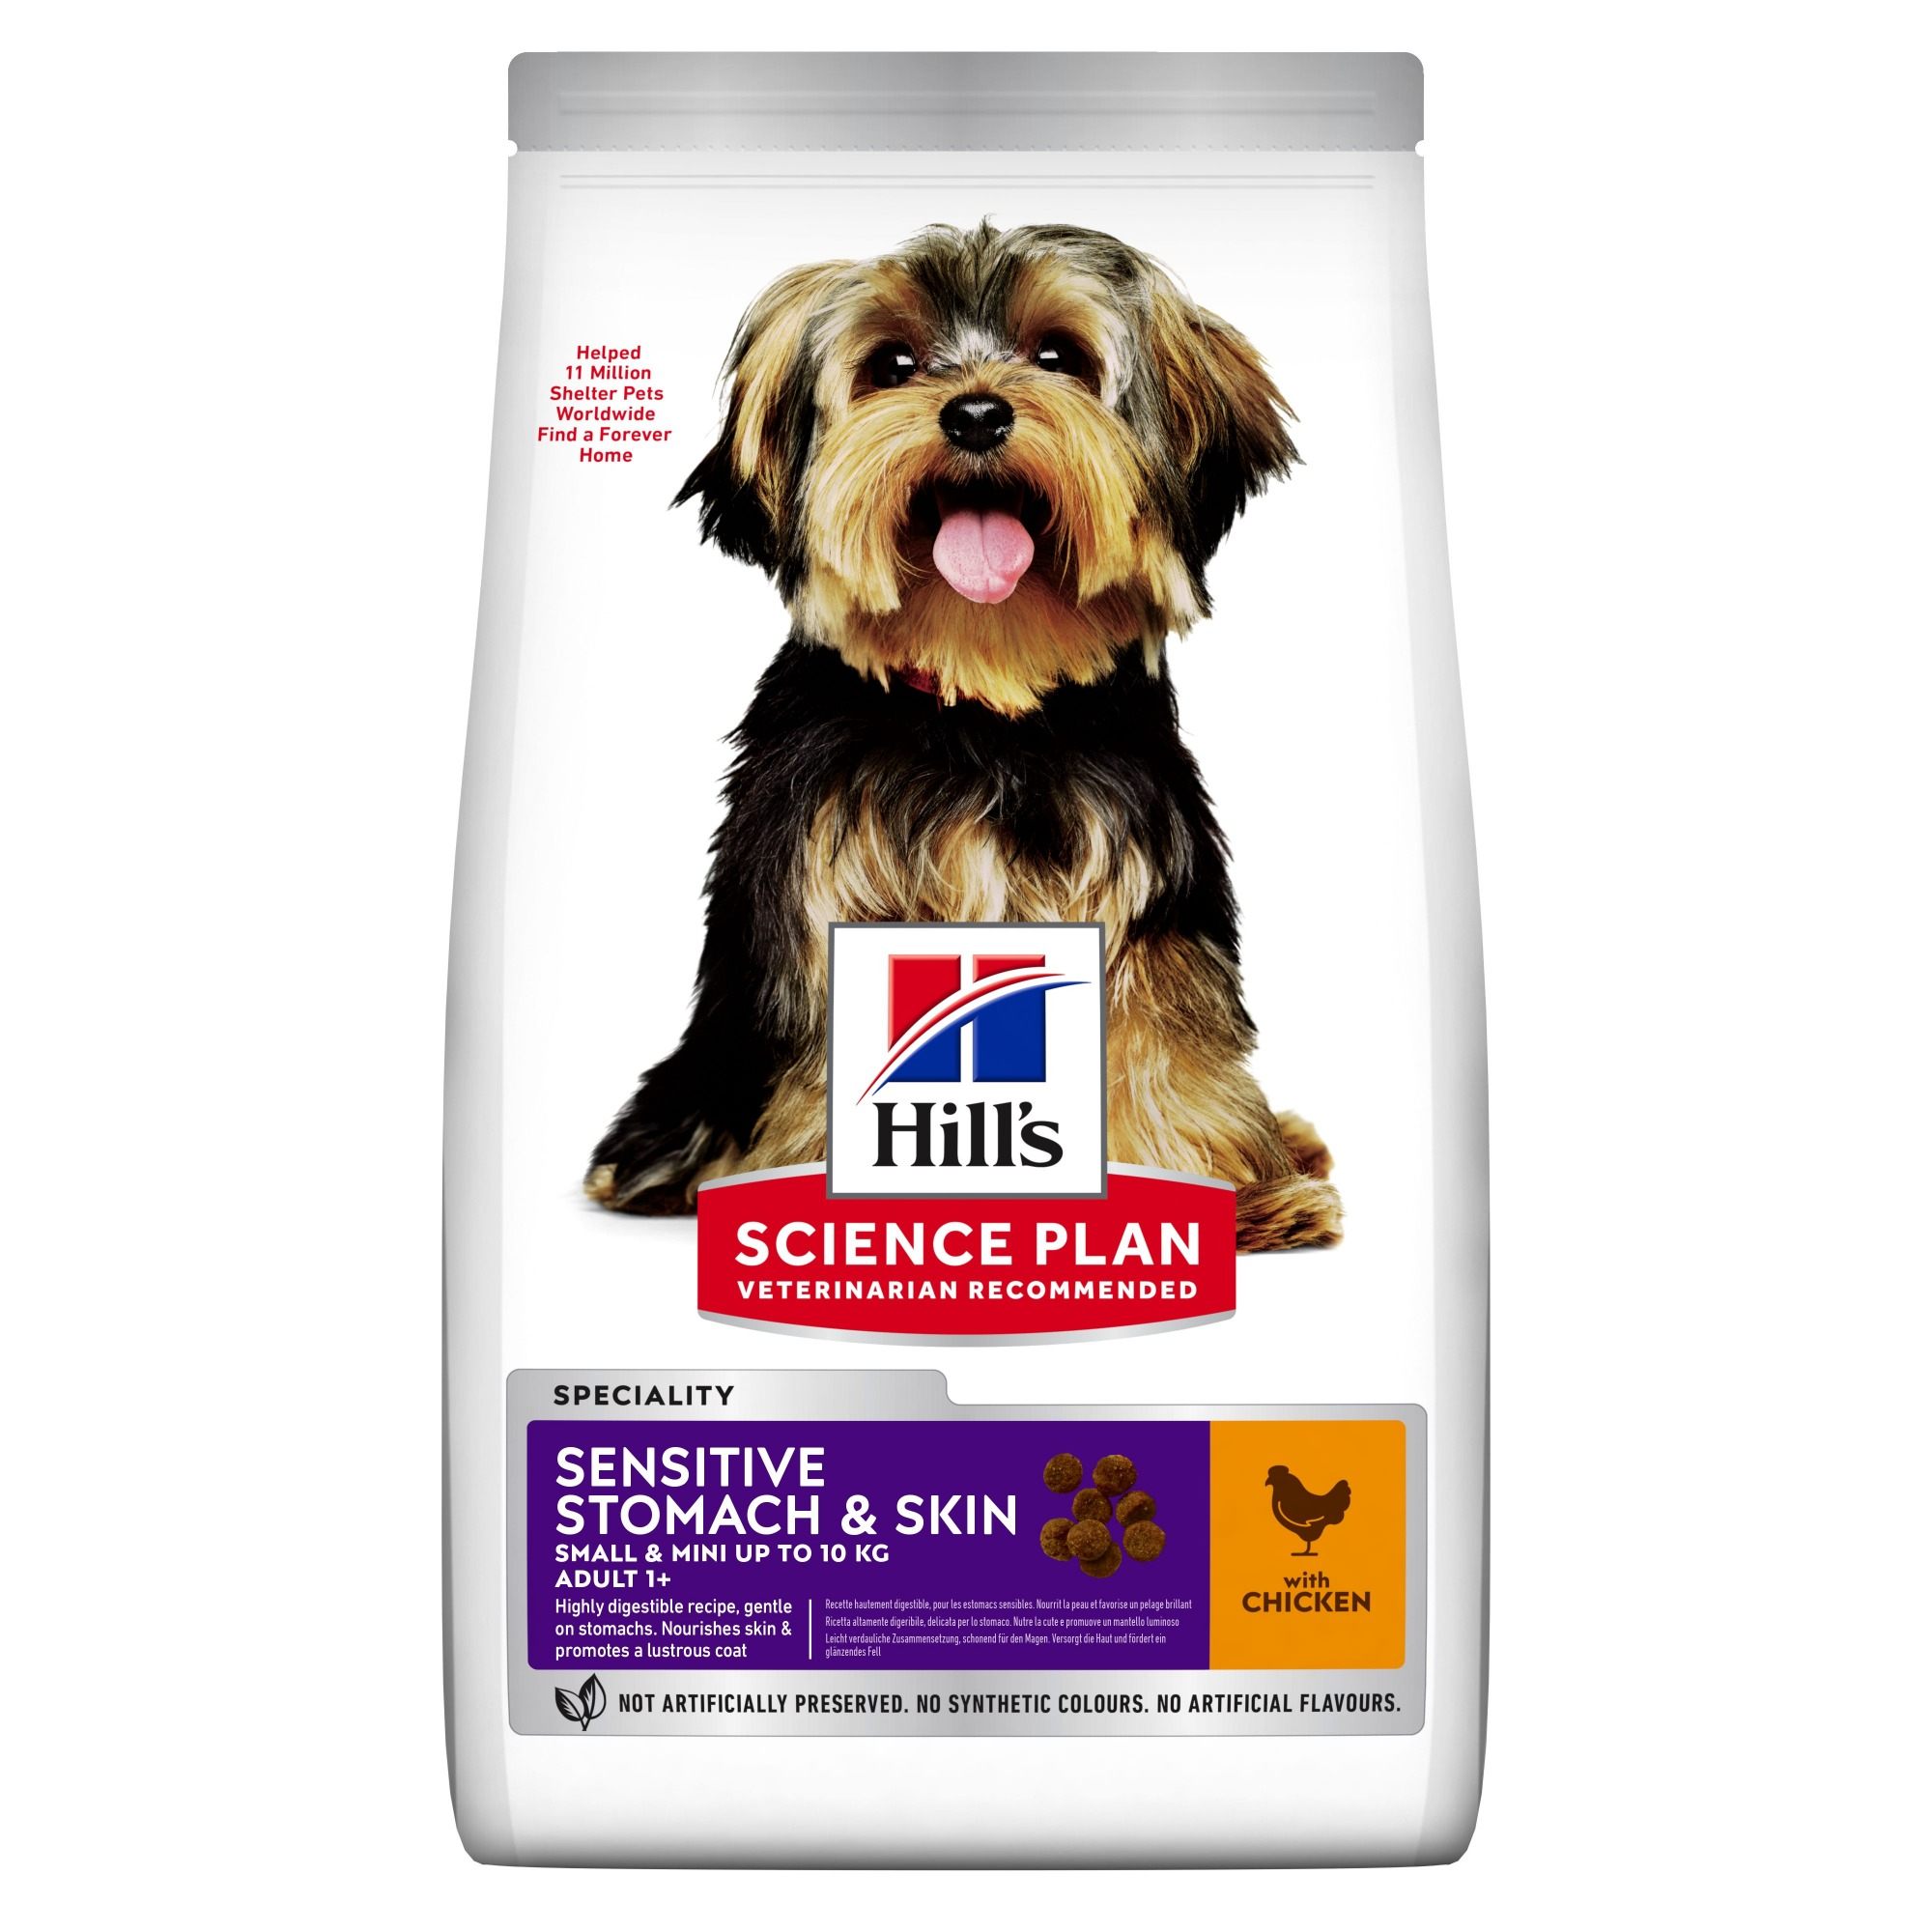 Hill's Science Plan Adult Sensitive Stomach and Skin Small and Mini Dog Food Chicken